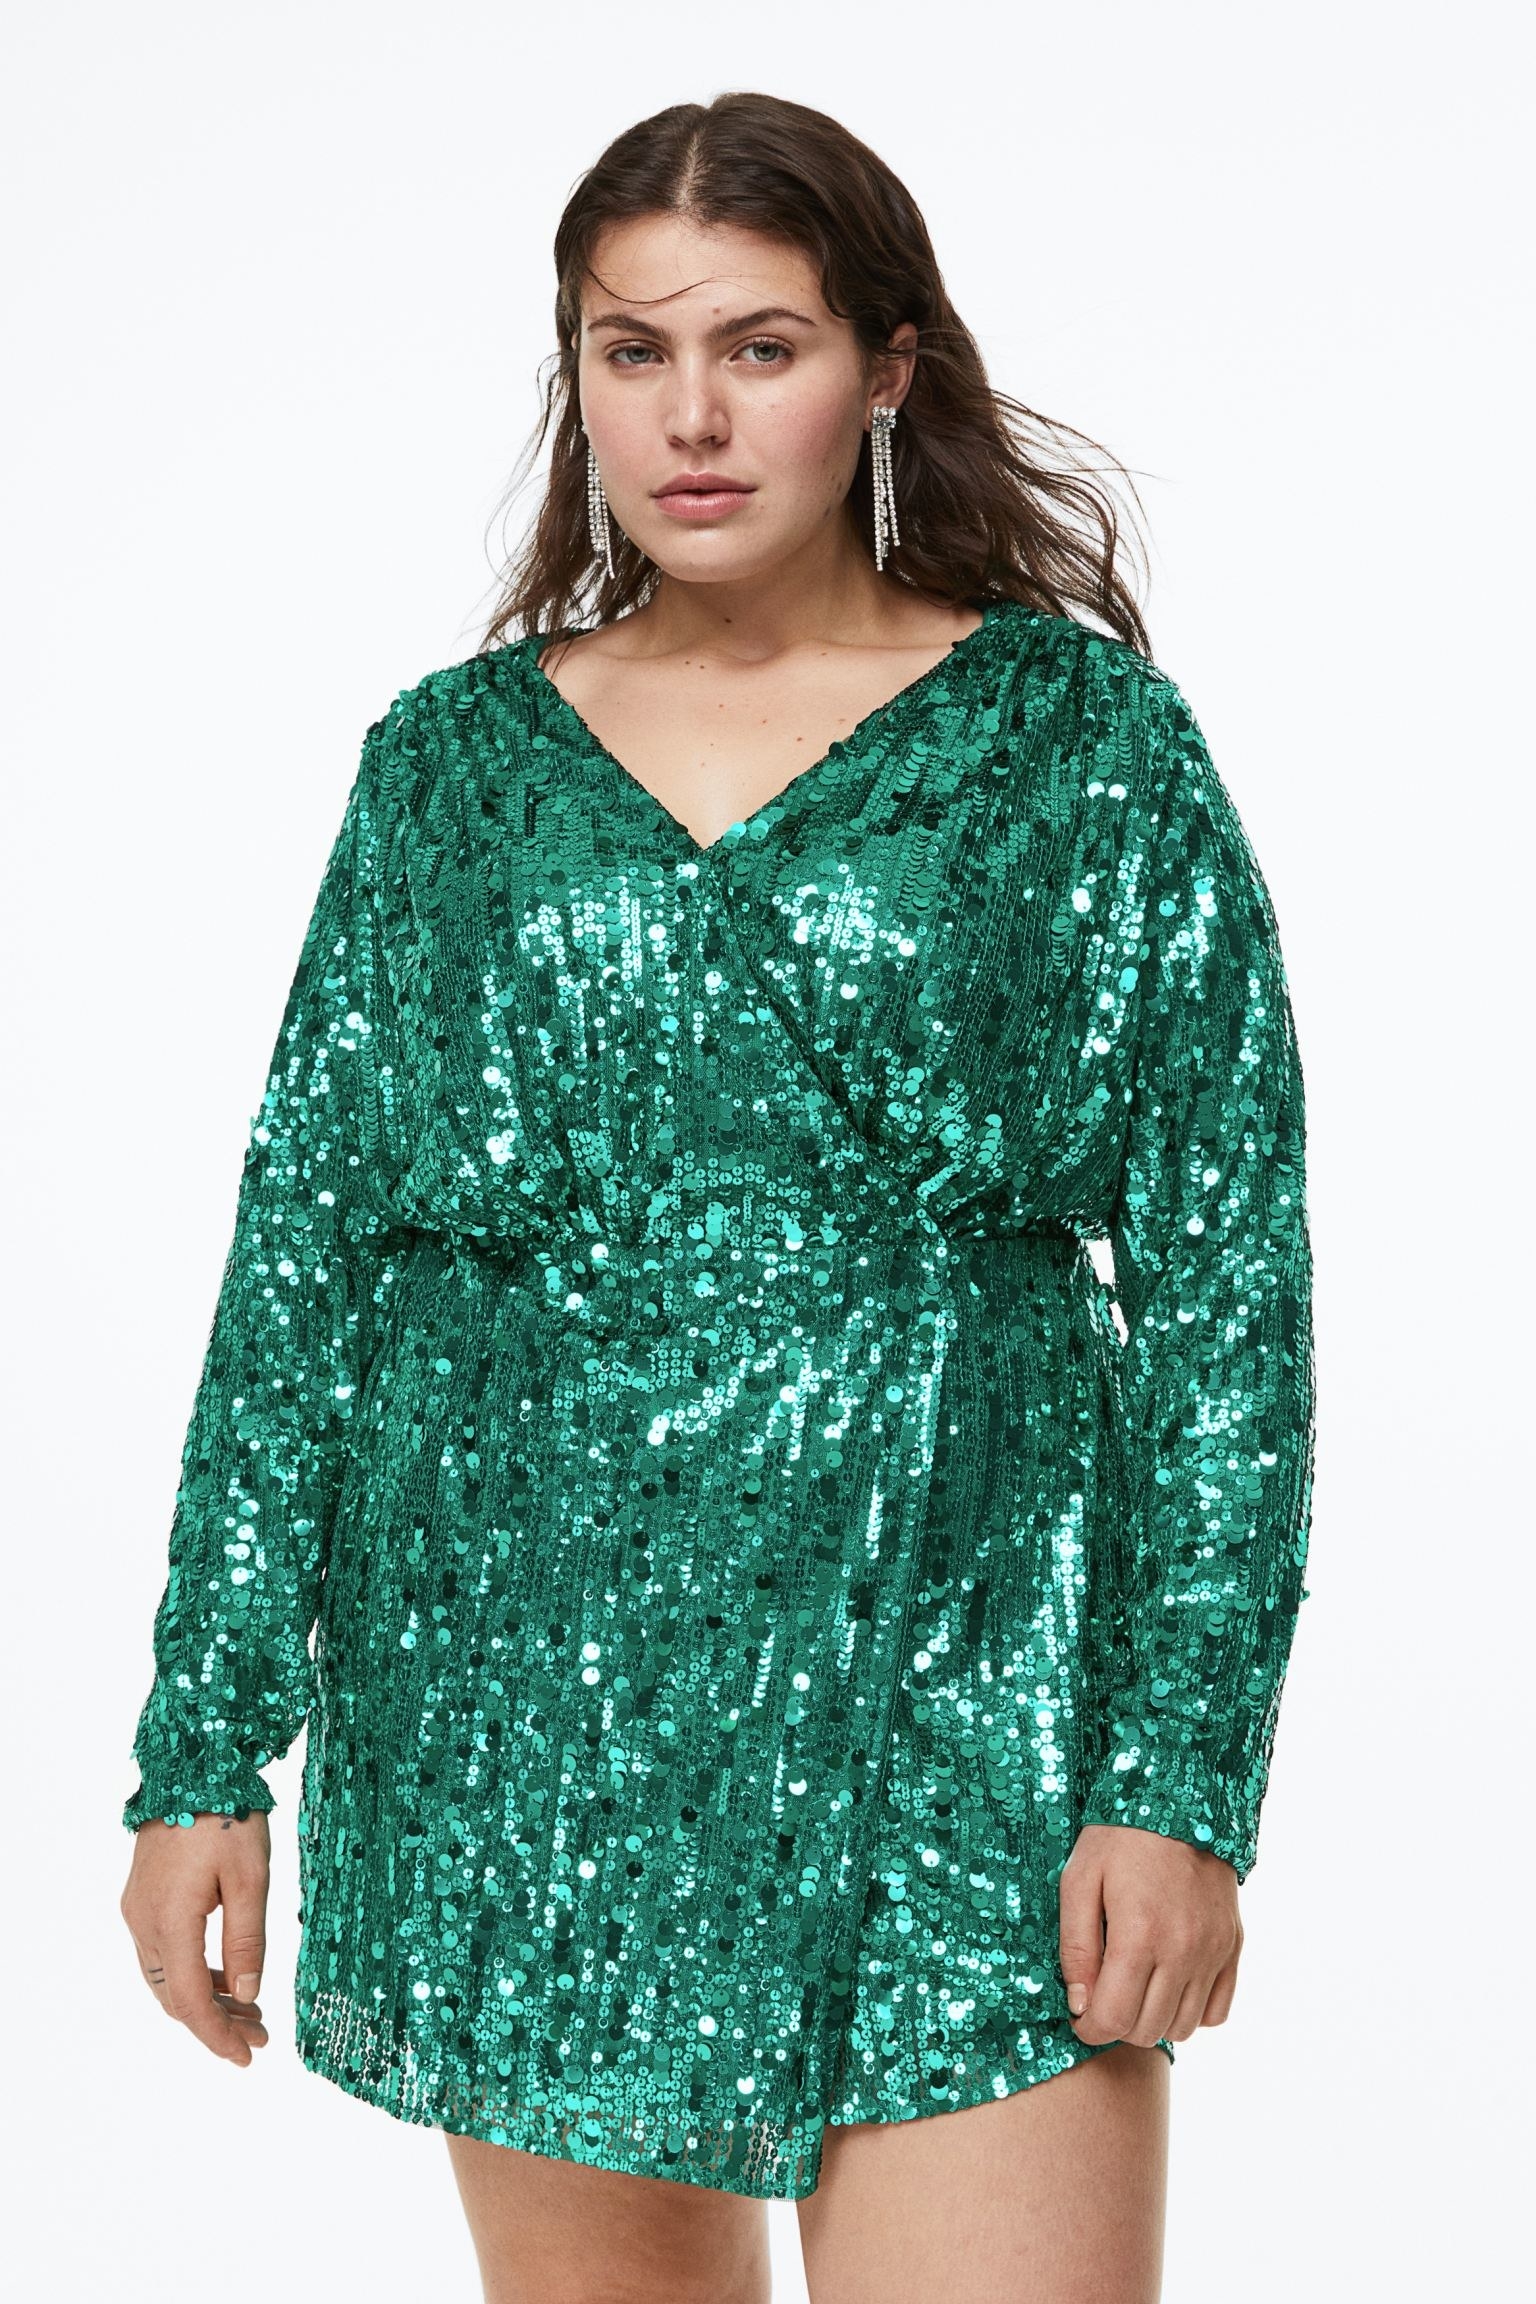 a model wearing the green sequin dress